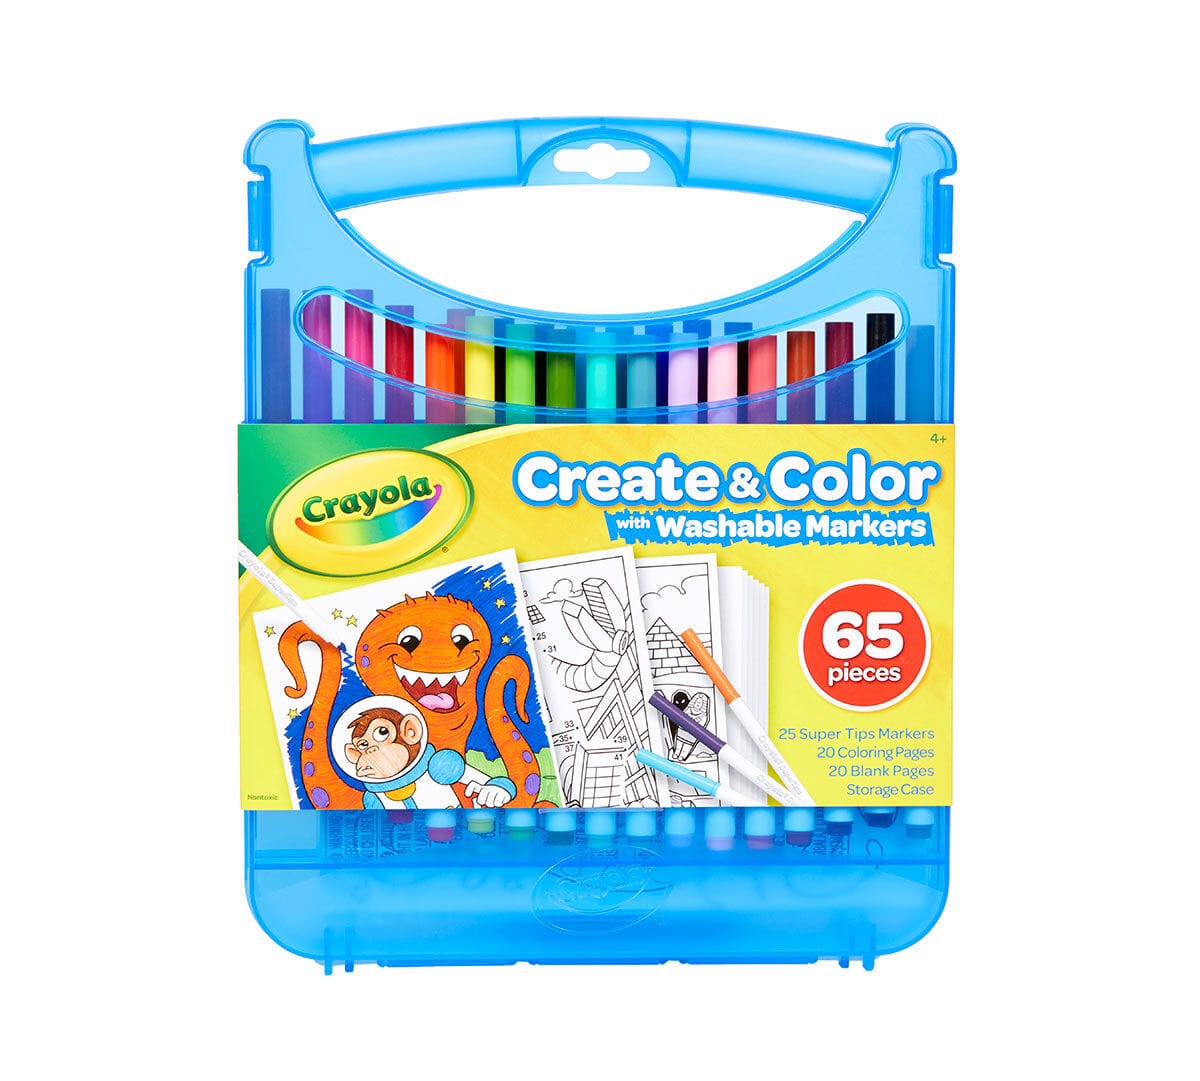 Create and Color with Super Tips Washable Markers | Crayola by Crayola, USA Art & Craft